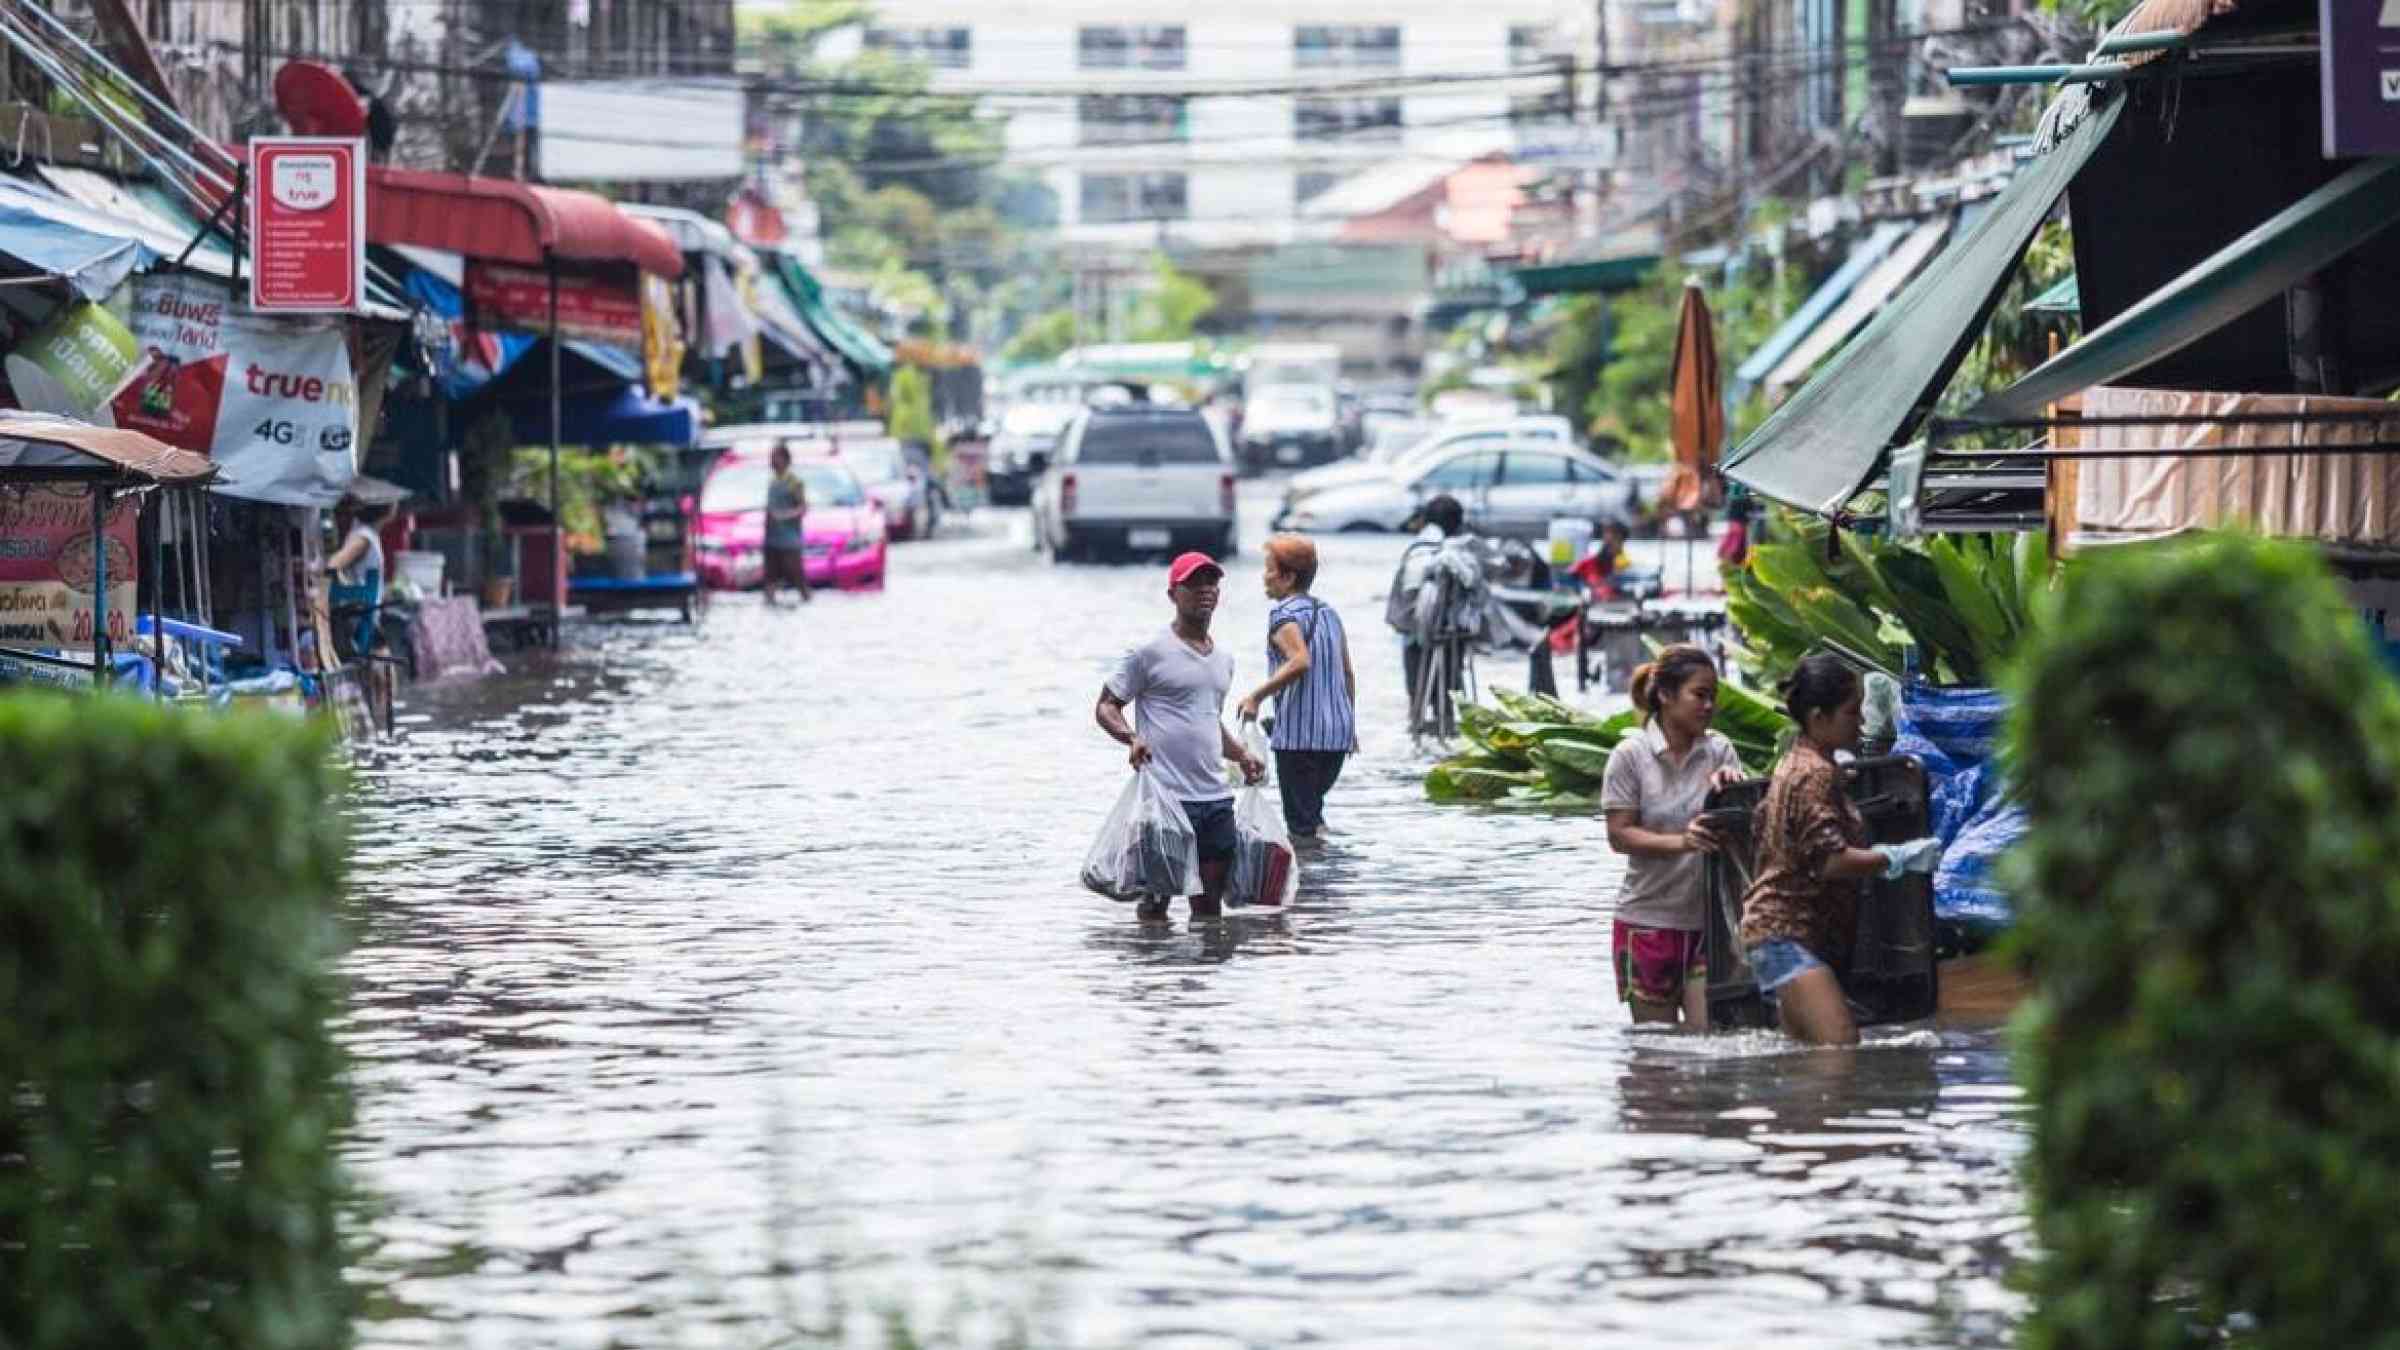 Bangkok residents wade floods after heavy rains left the city inundated